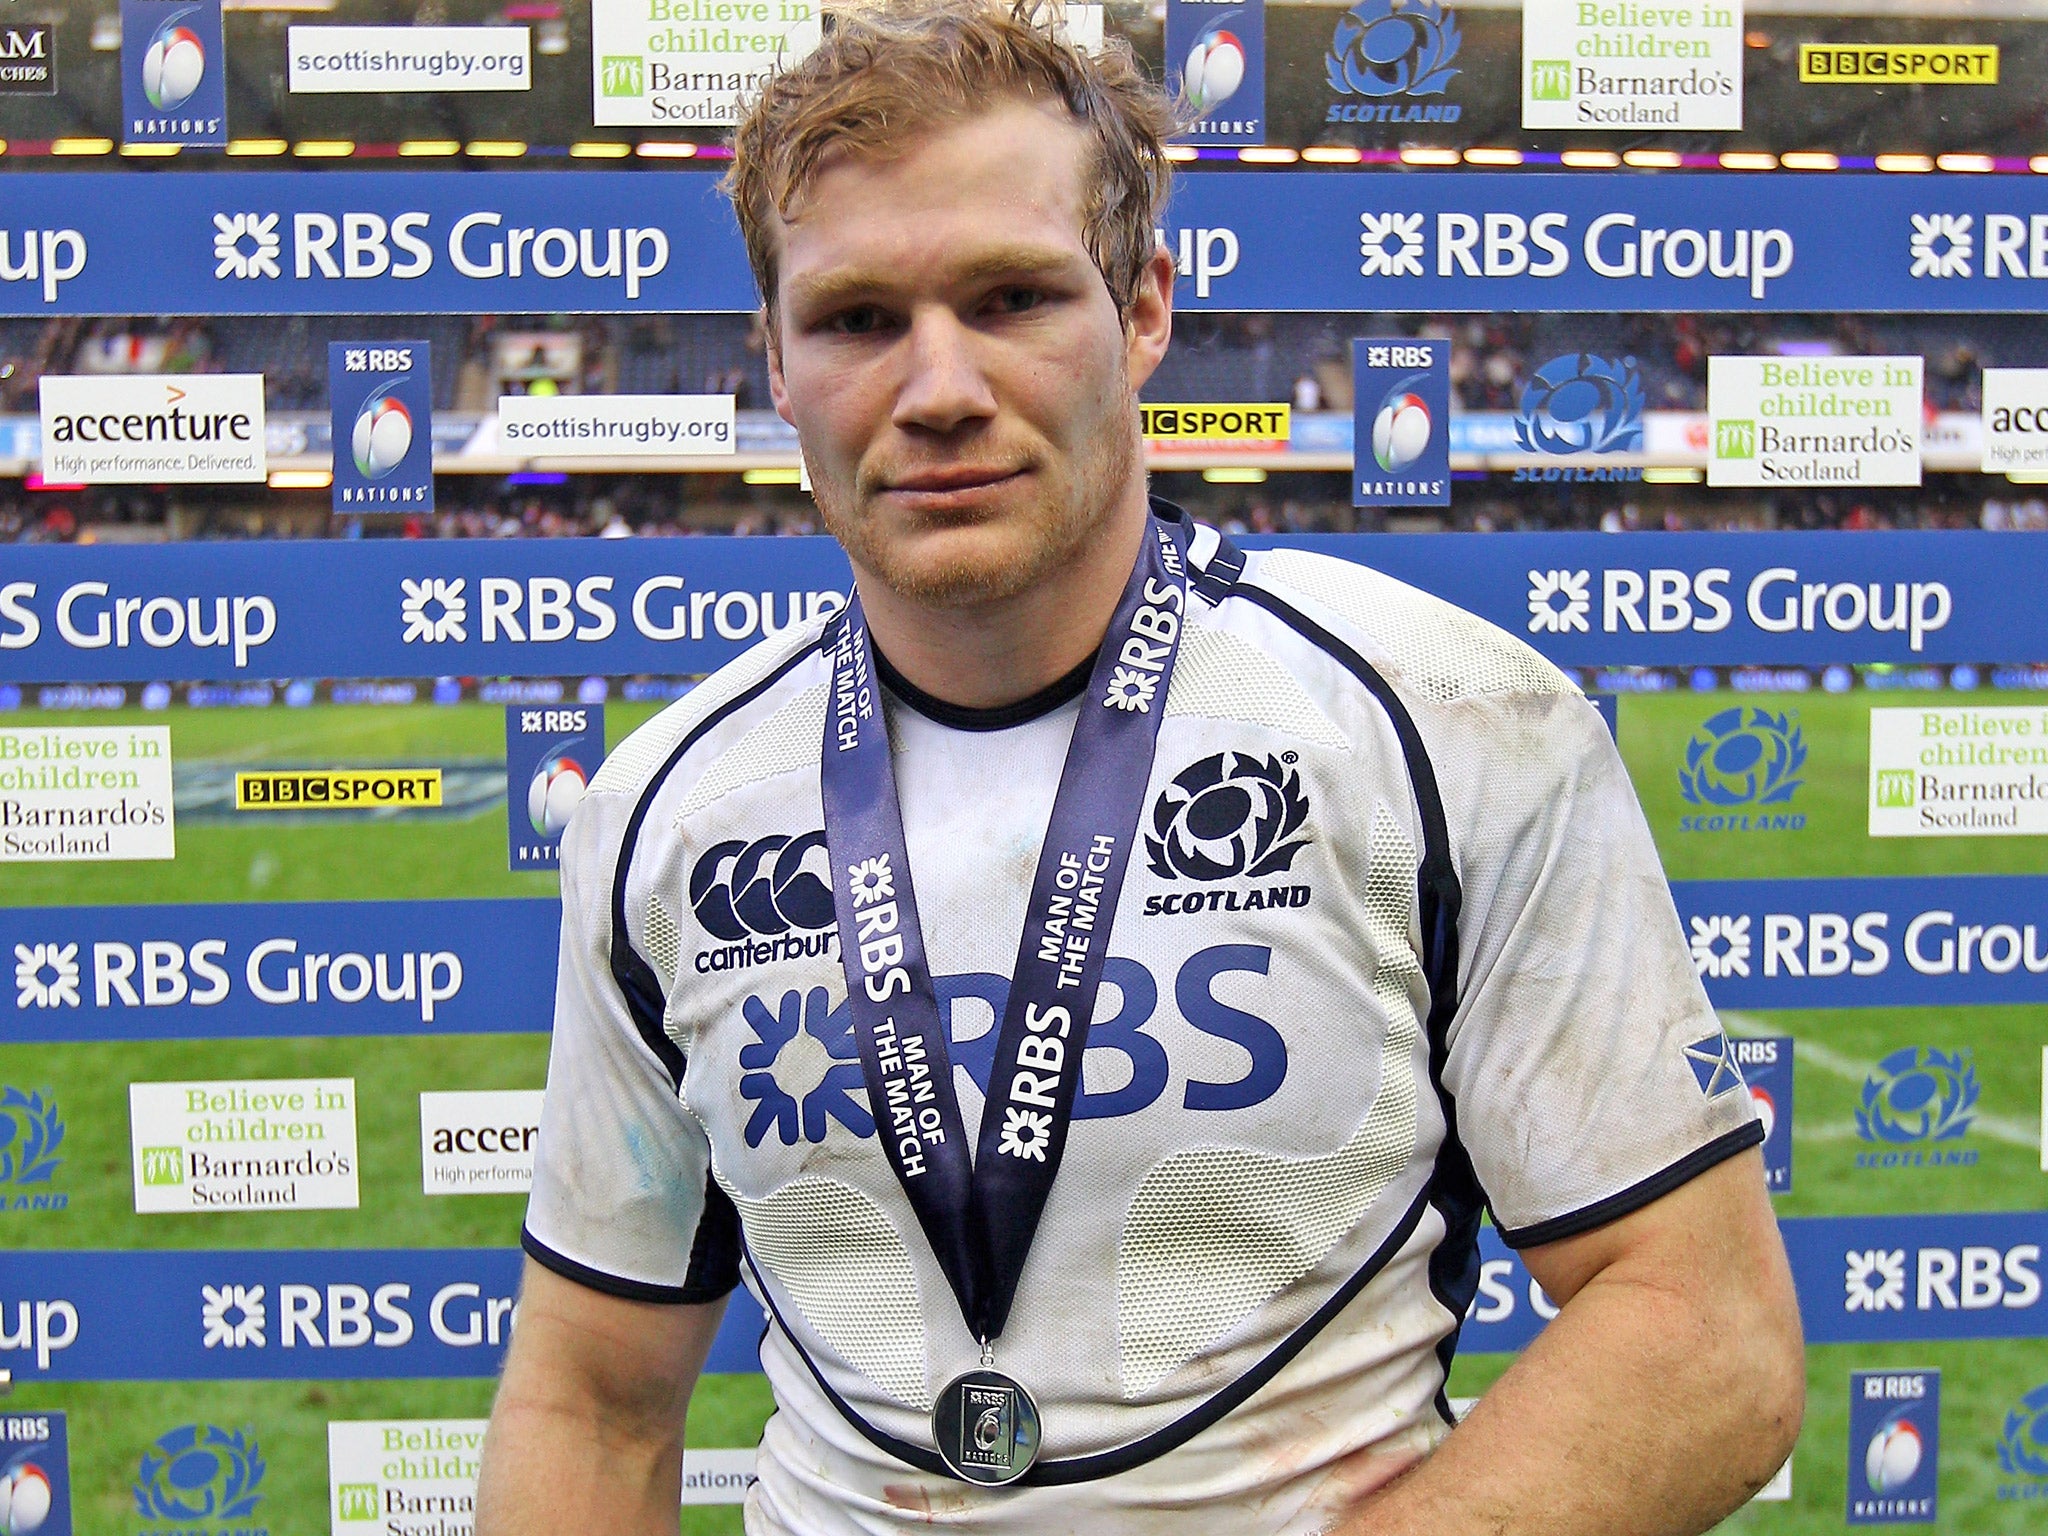 Rennie was capped 20 times by Scotland